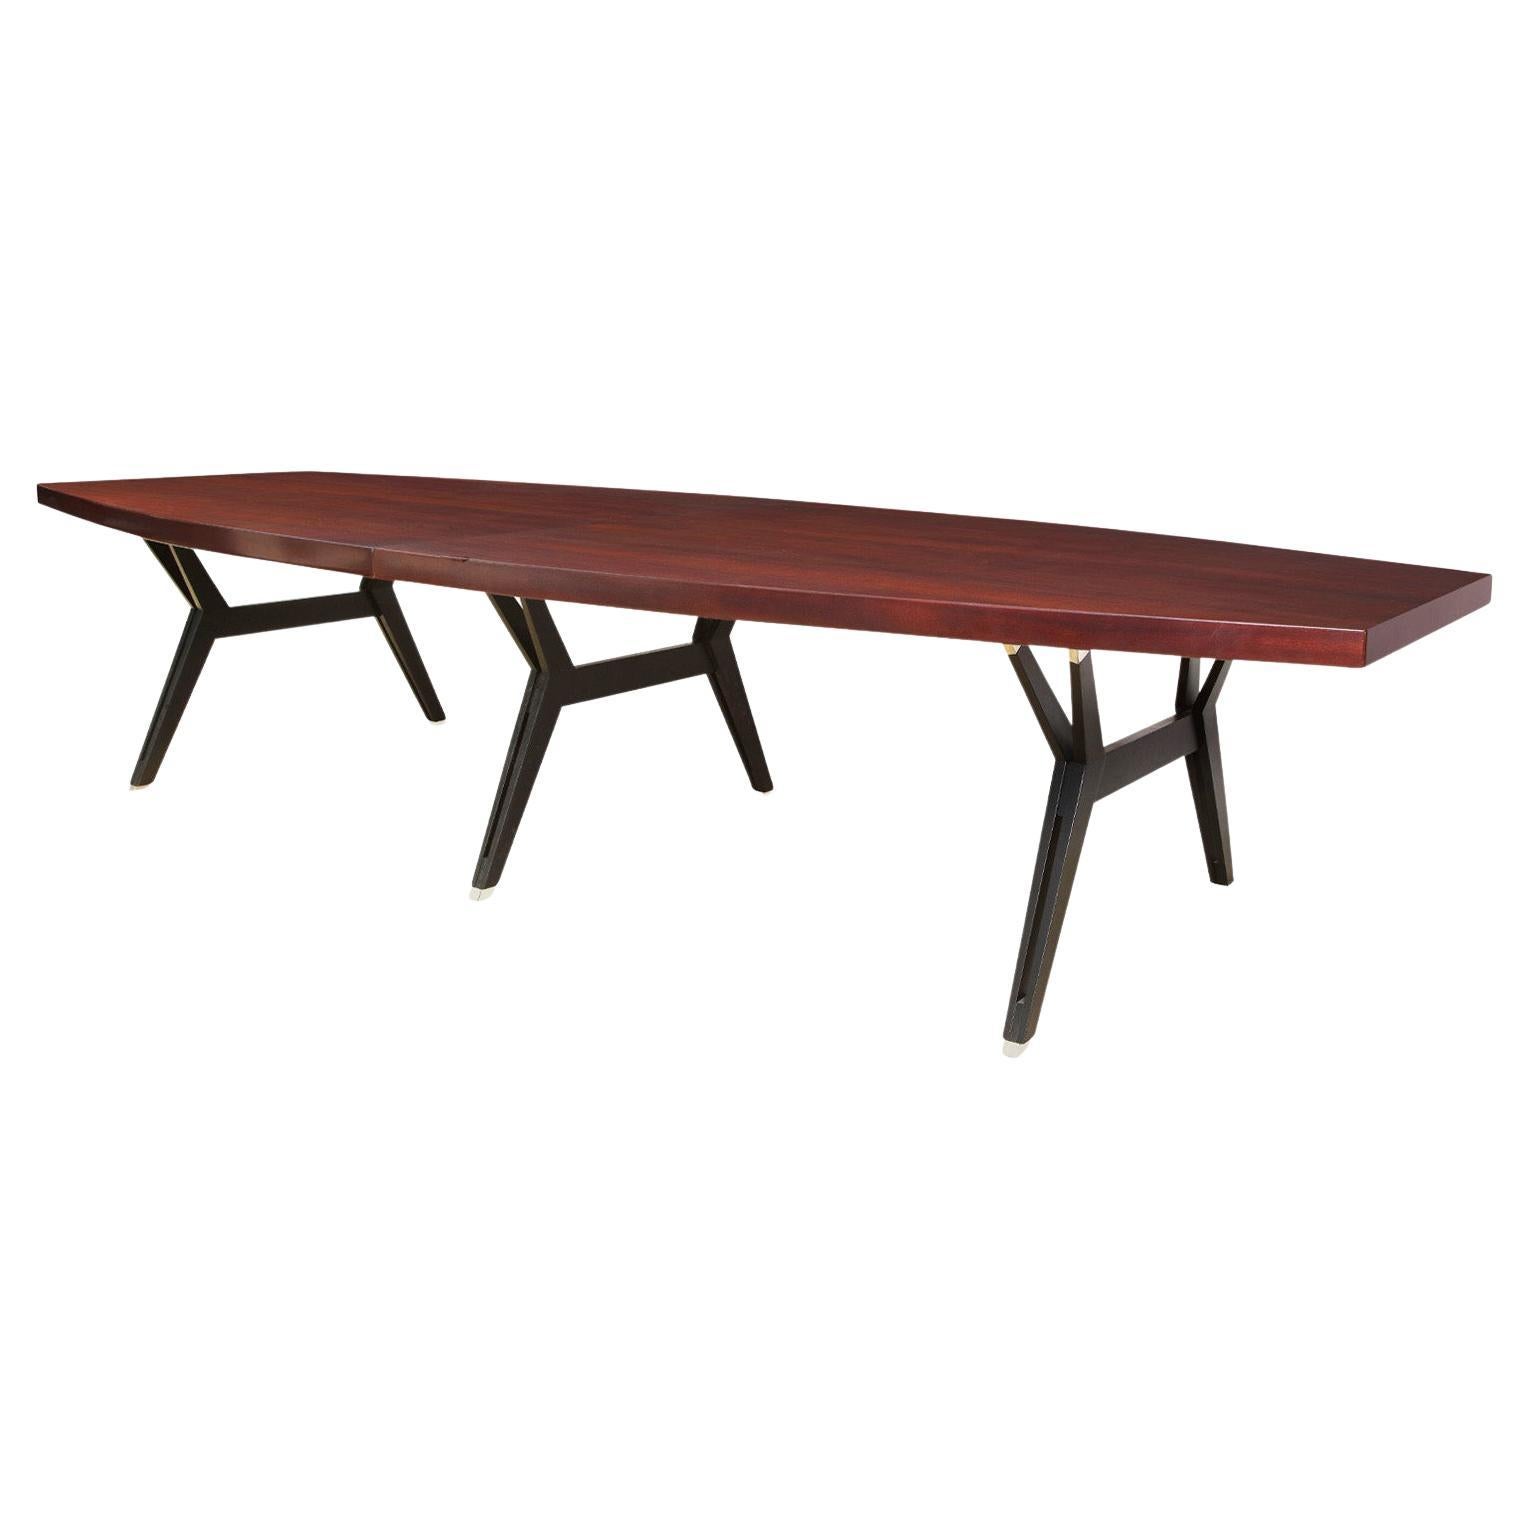 Ico Parisi Large Dining Table with Mahogany Top and Sculptural Legs, 1950s